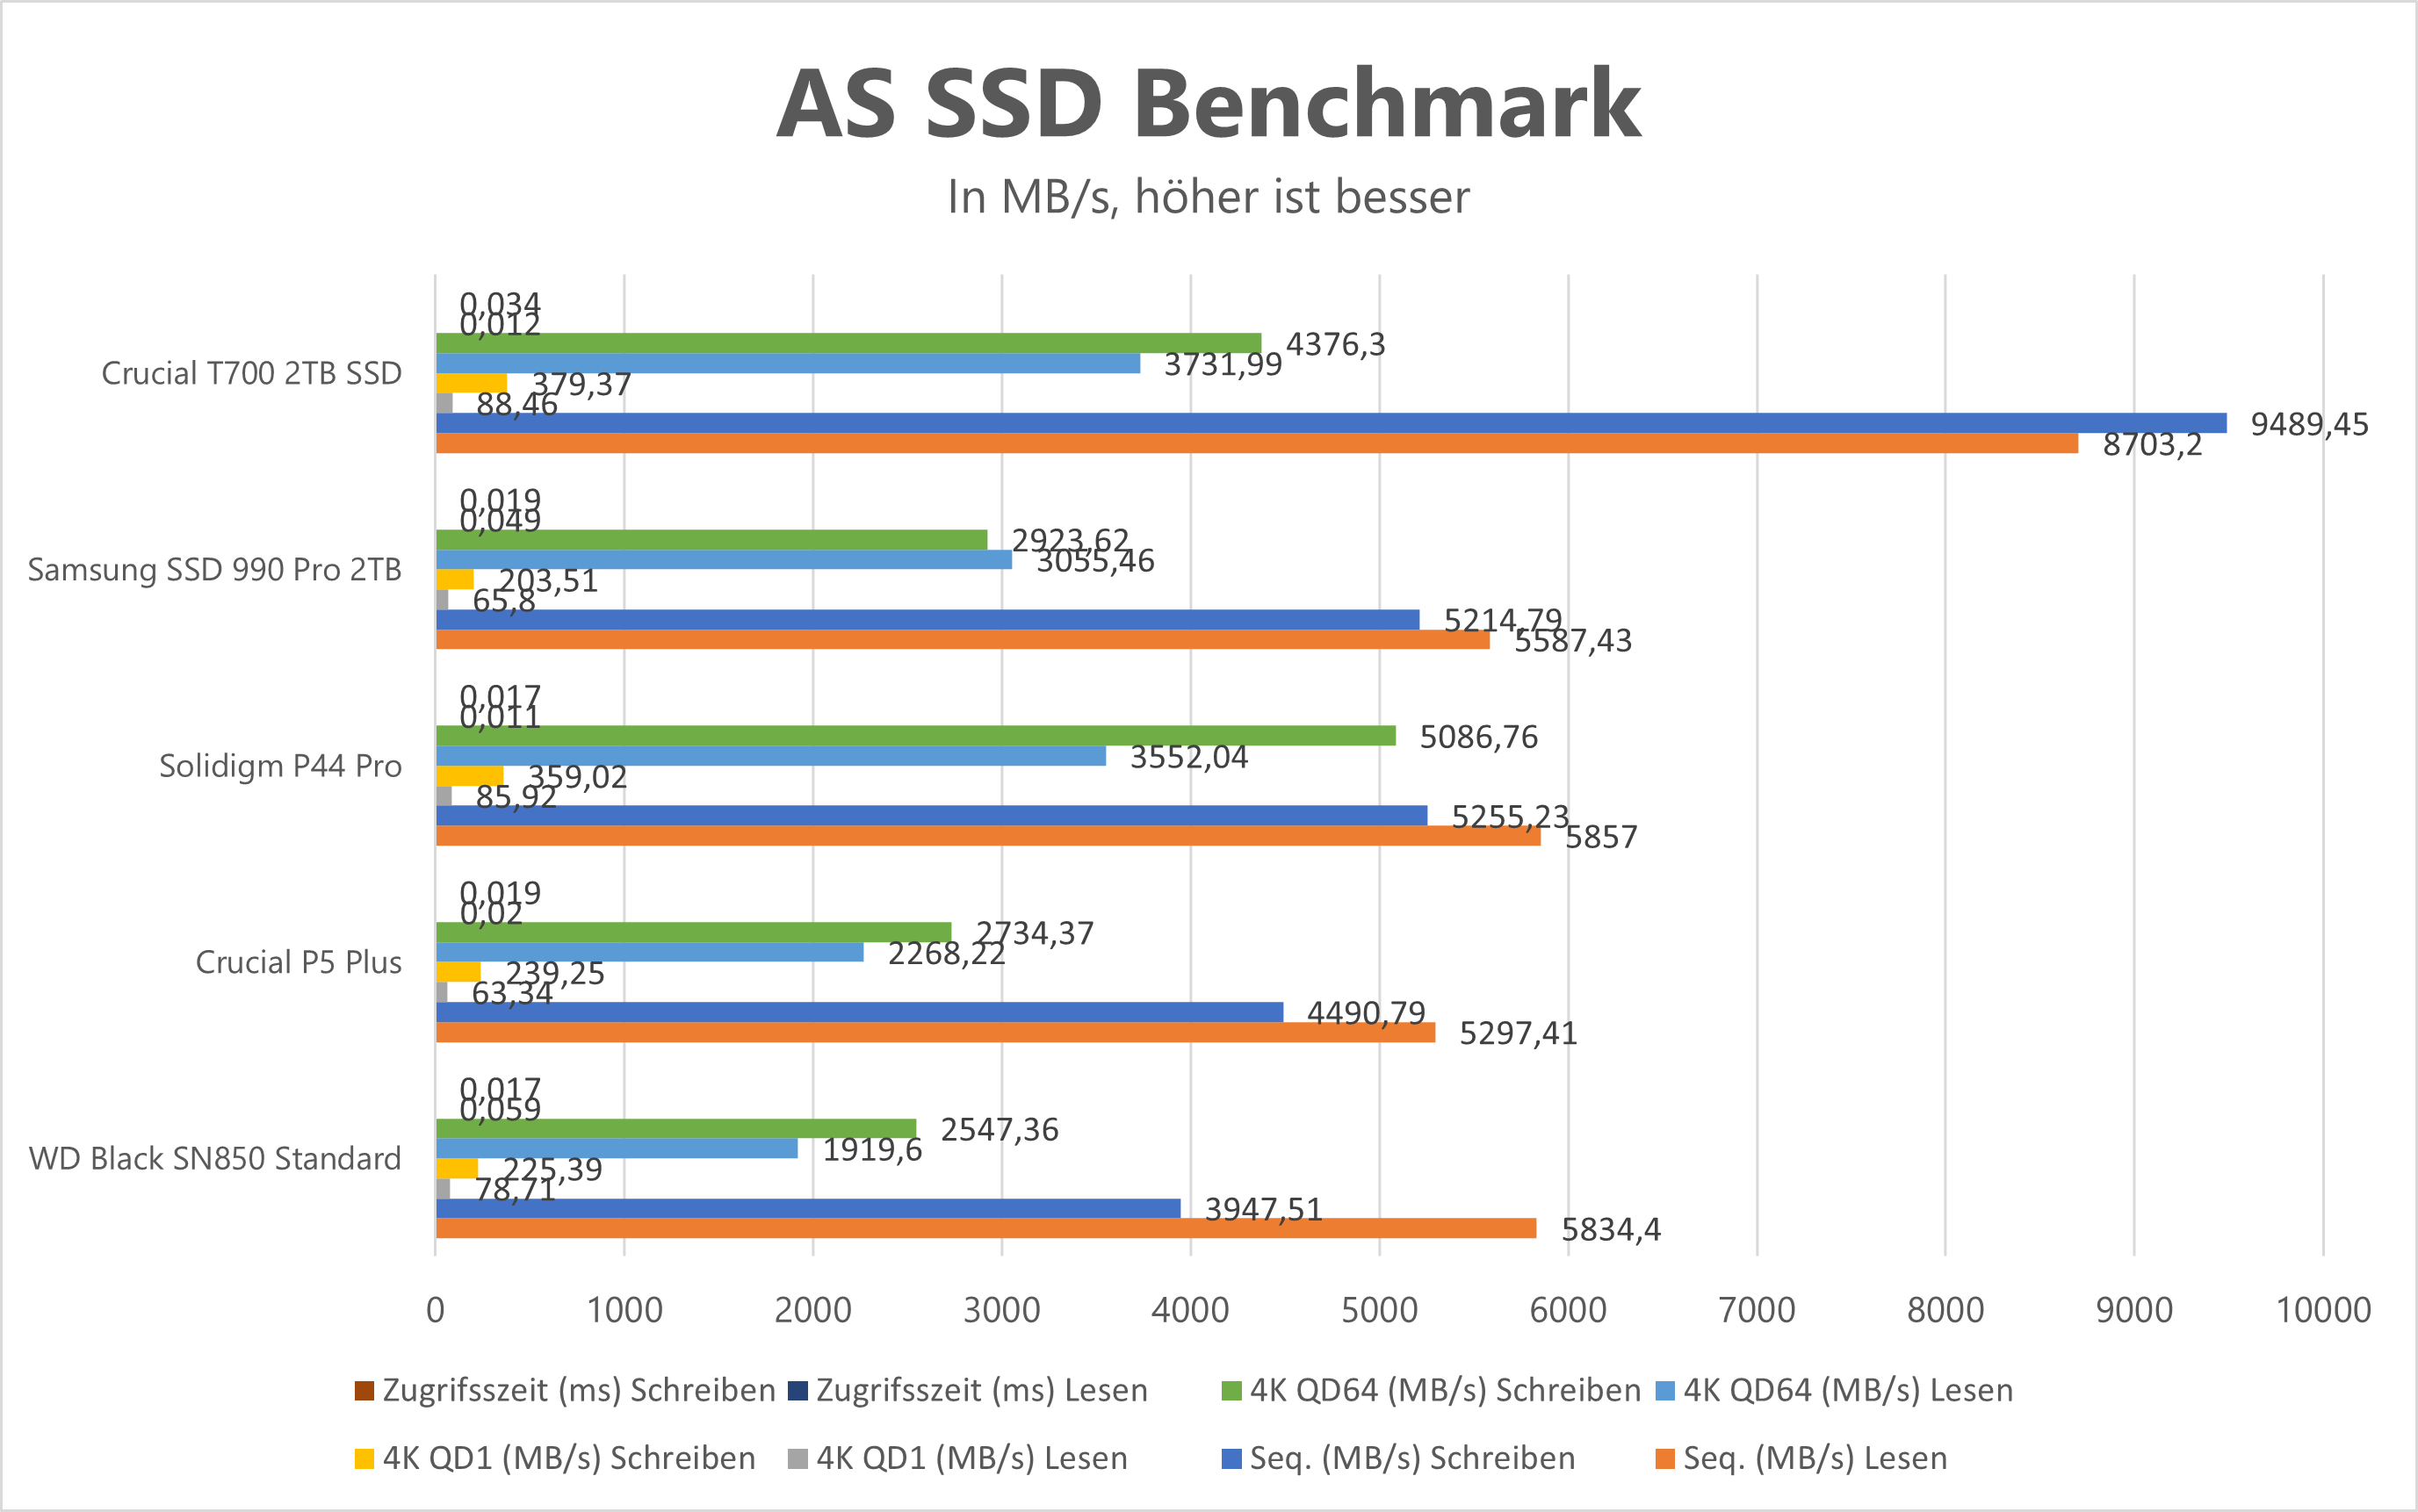 Crucial T700 AS SSD Benchmark